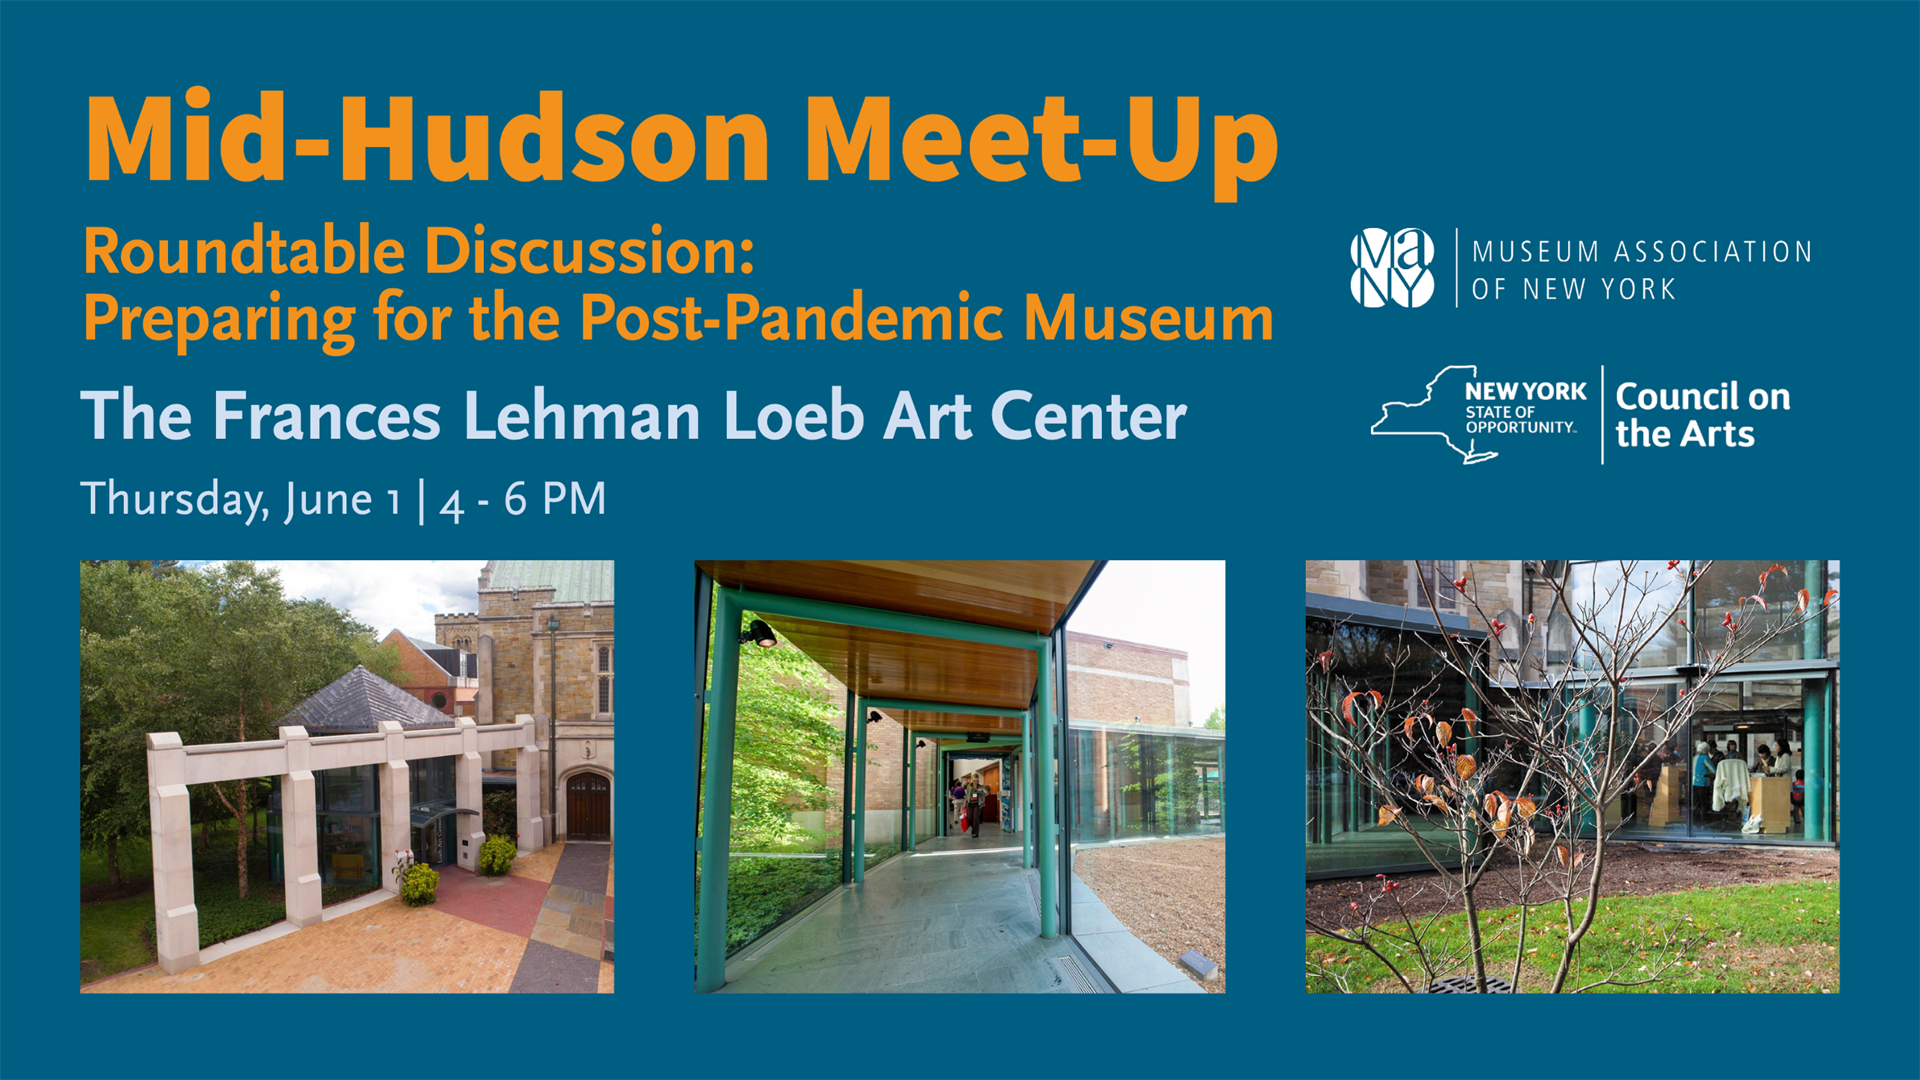 Mid-Hudson Meet-Up and Roundtable Discussion at The Frances Lehman Loeb Art Center onJune 1 from 4 to6 PM